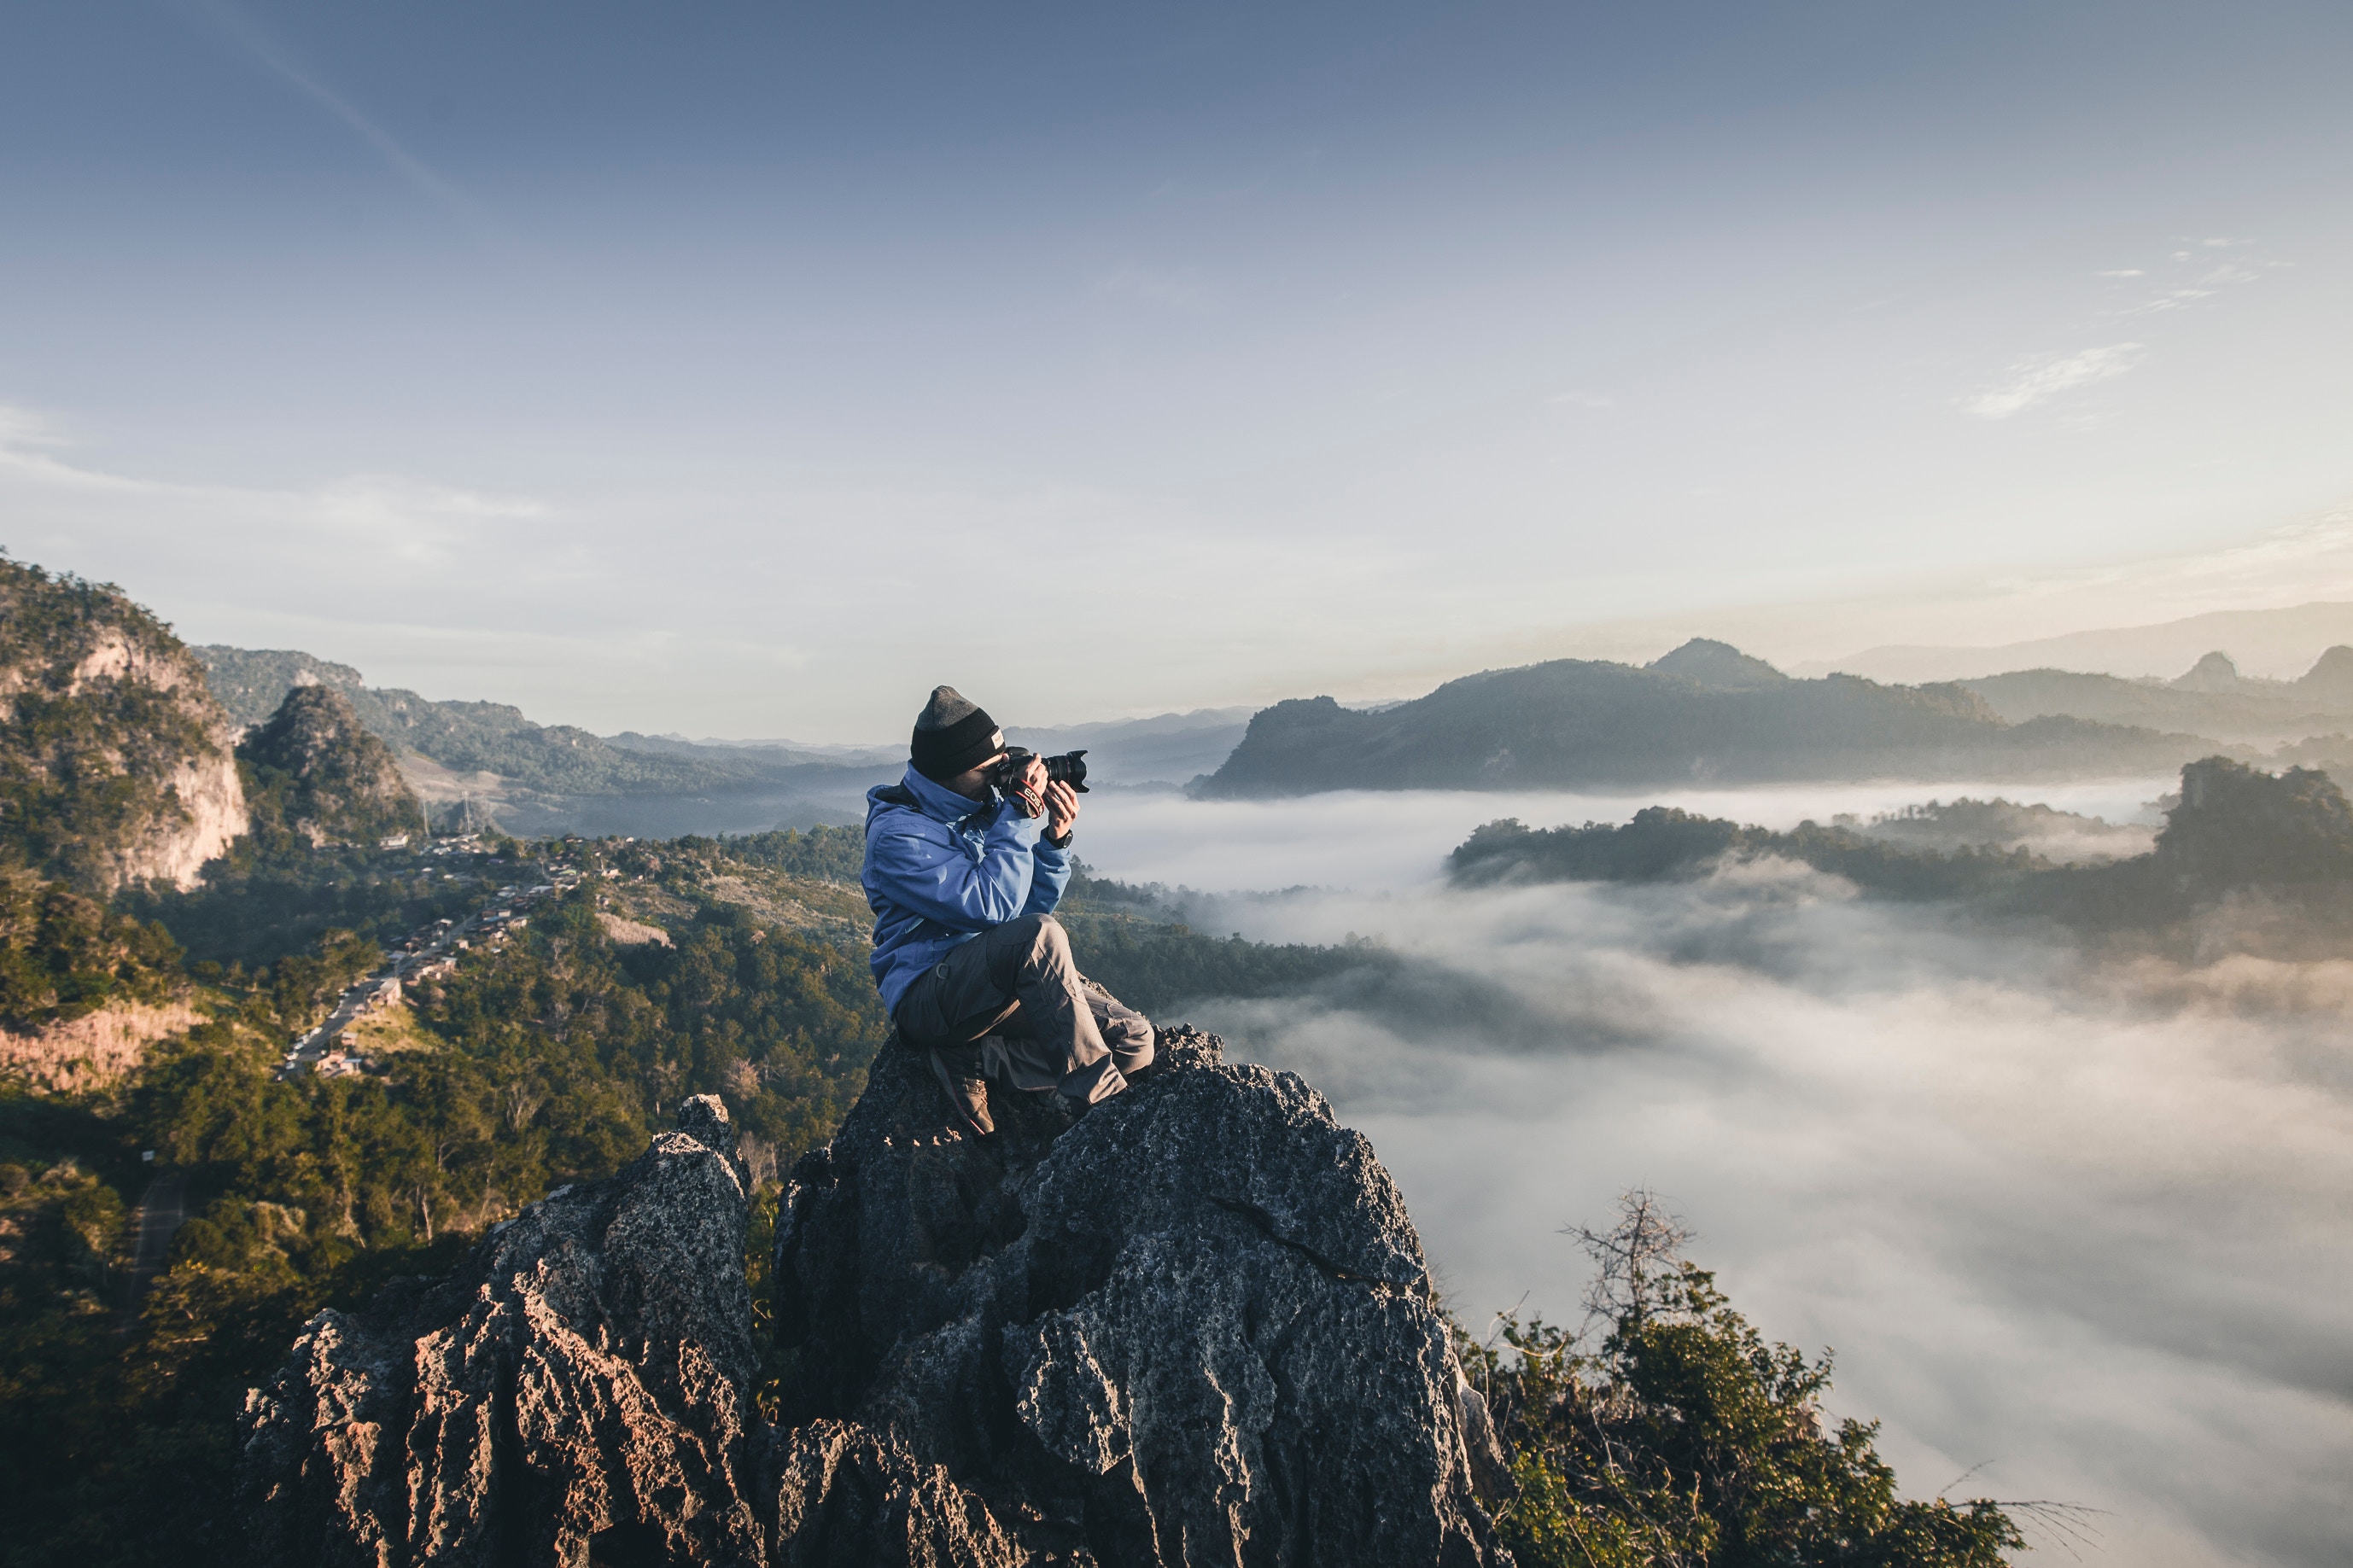 Man taking a picture on a mountain